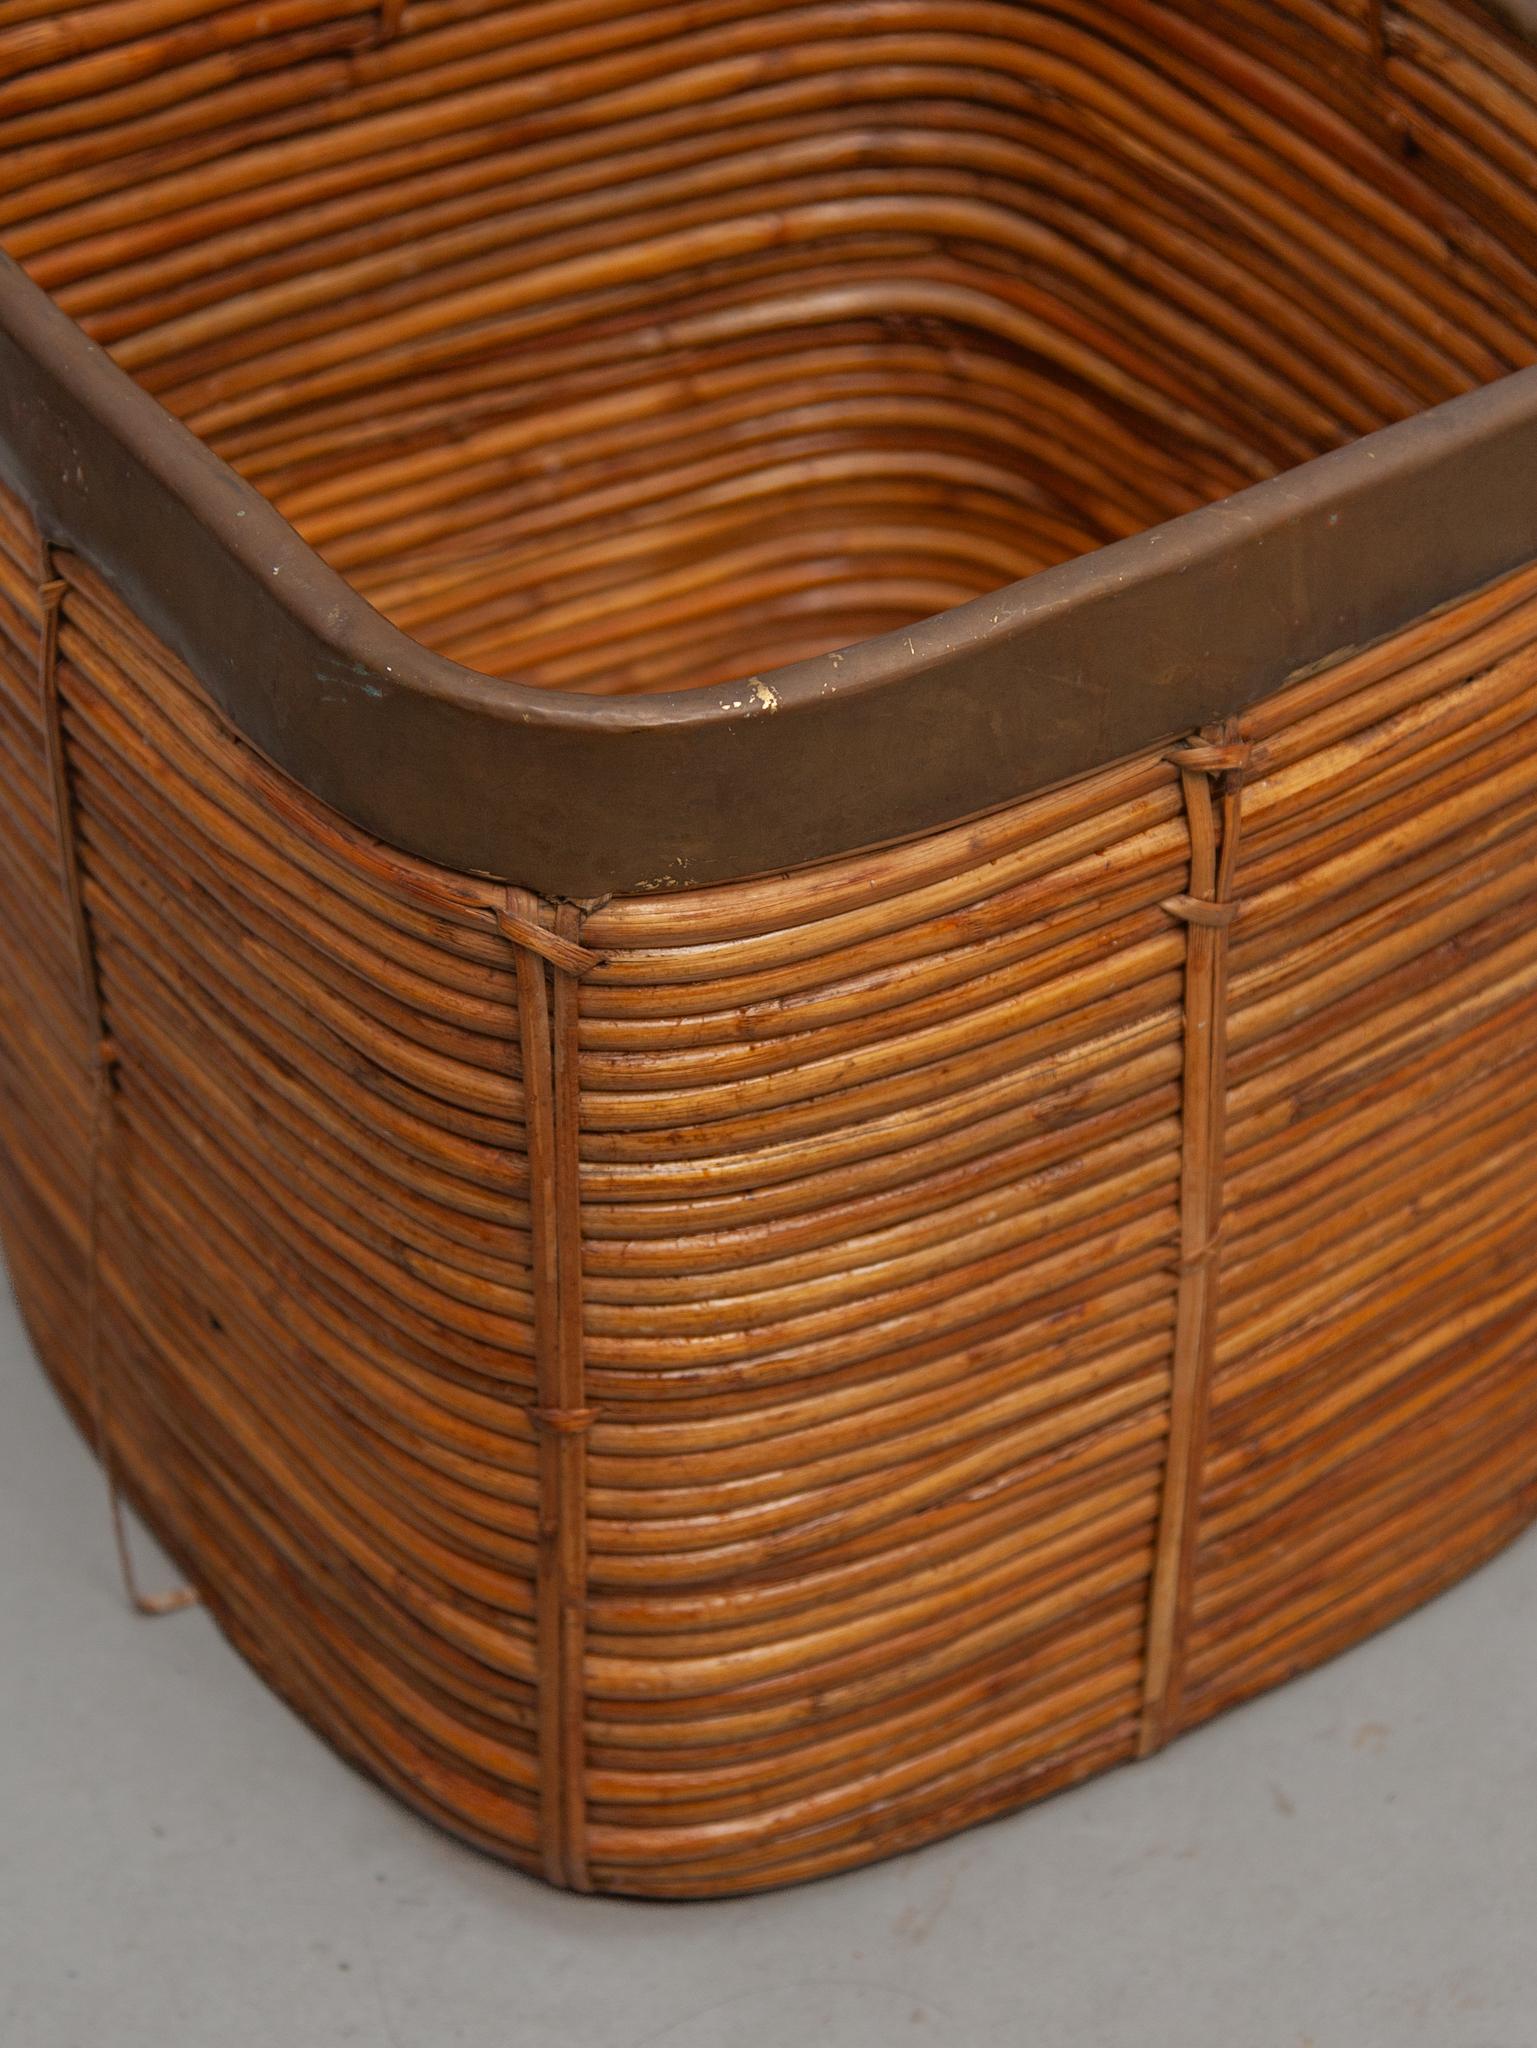 Large Mid-Century Gabriella Crespi Style Brass & Rattan Bamboo Cube Planter For Sale 2